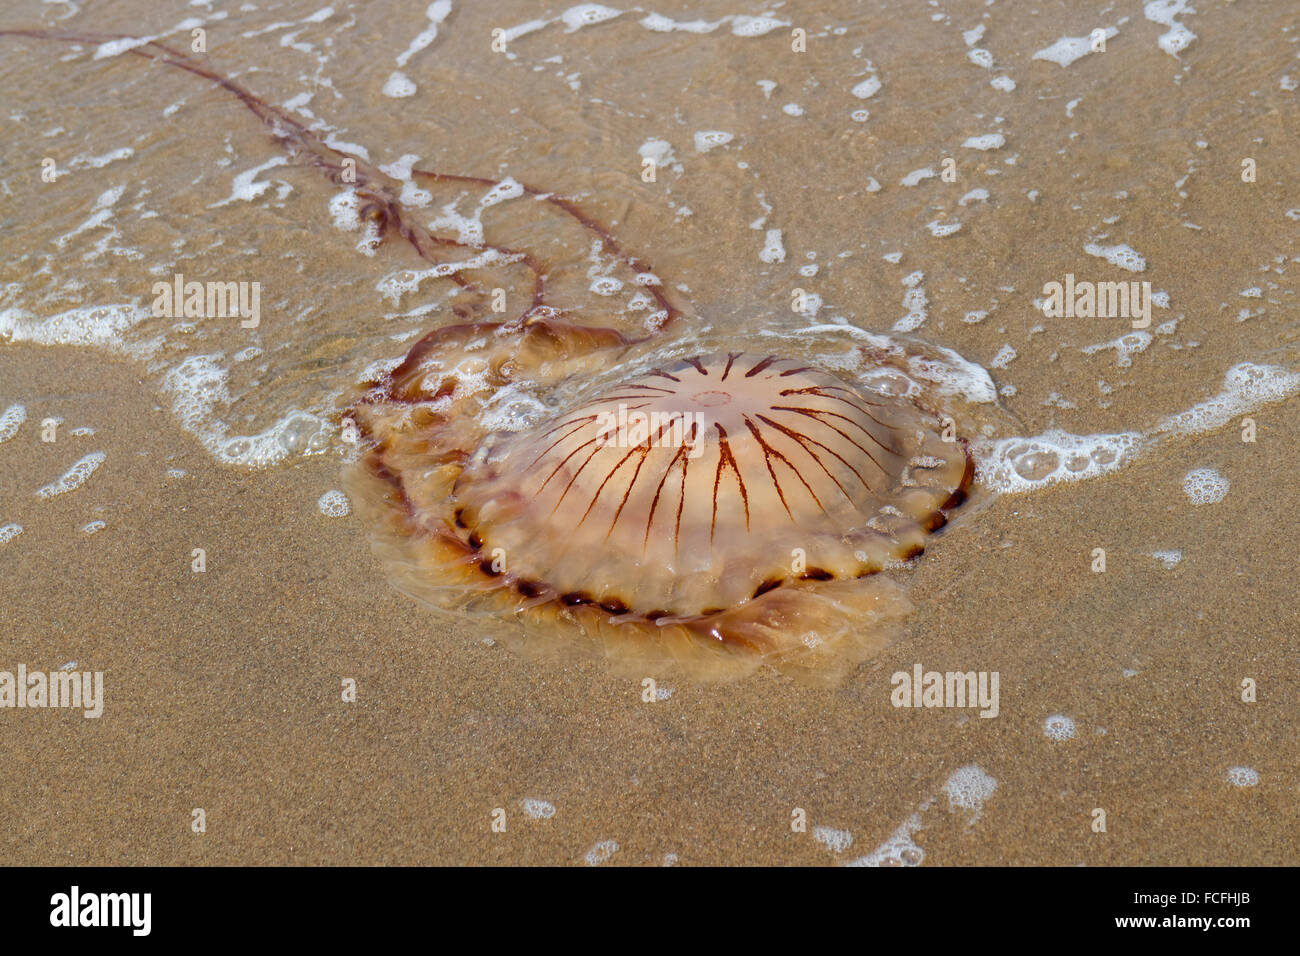 Compass jellyfish washed ashore at the beach Stock Photo